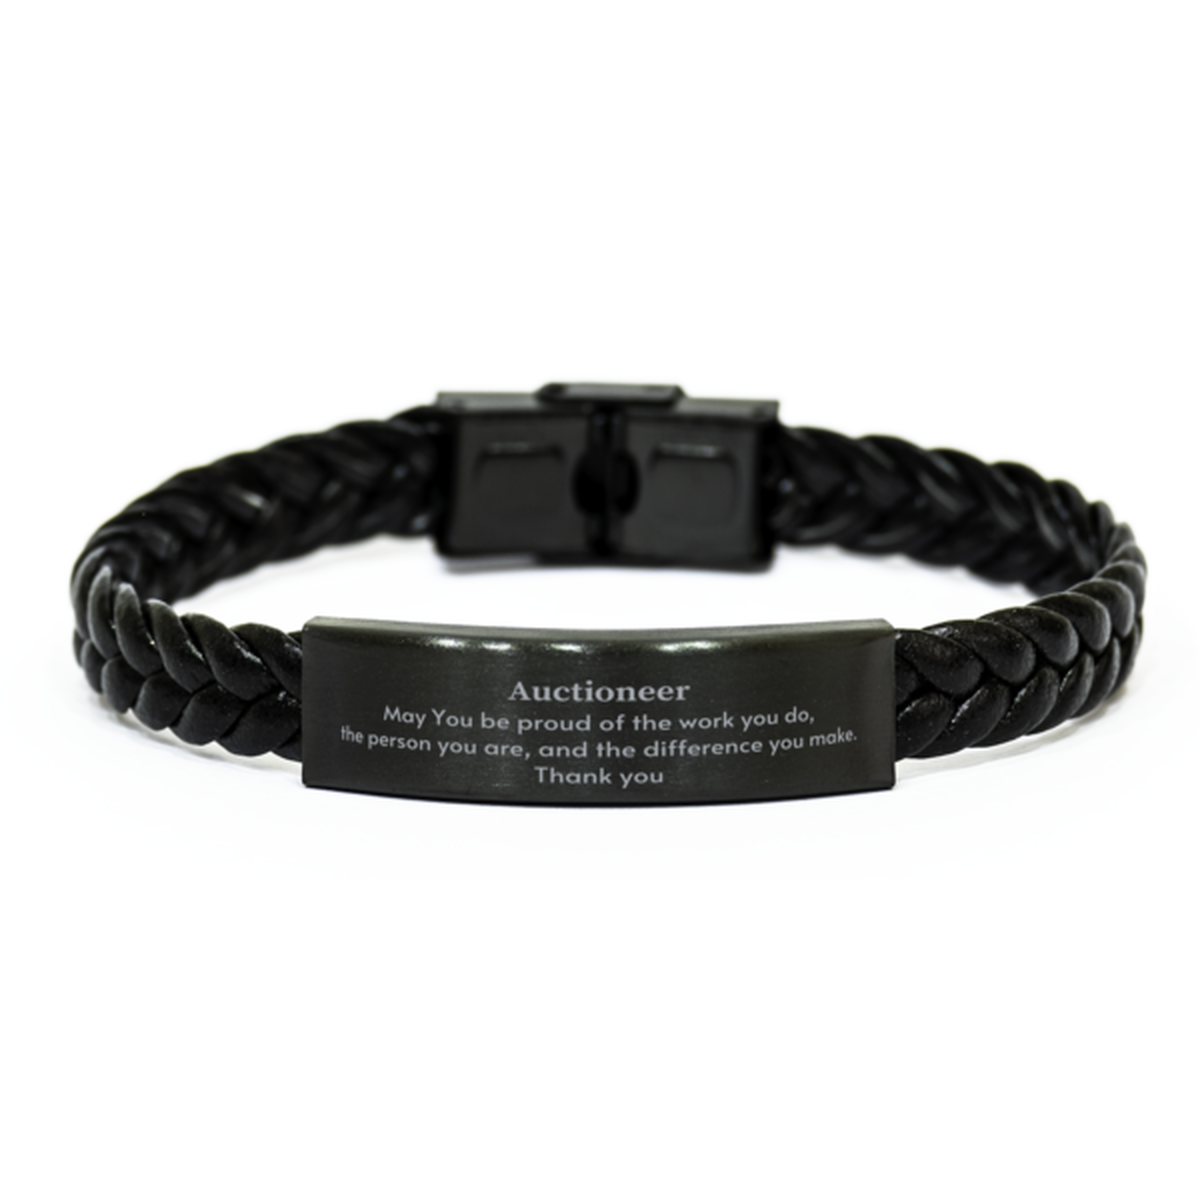 Heartwarming Braided Leather Bracelet Retirement Coworkers Gifts for Auctioneer, Auctioneer May You be proud of the work you do, the person you are Gifts for Boss Men Women Friends